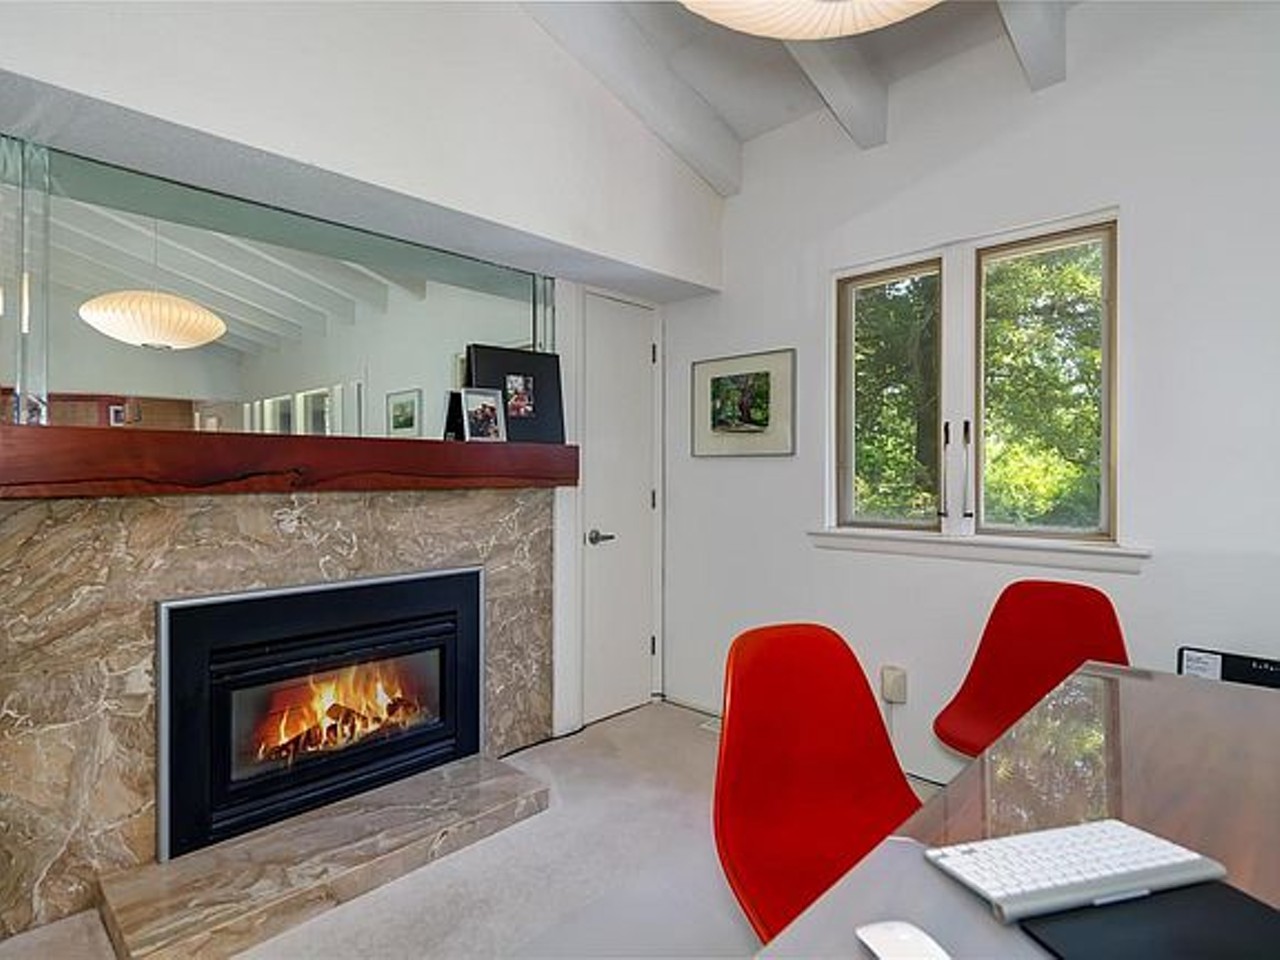 This Architect-Designed Mid-Century Modern House Is One of the Best in St. Louis [PHOTOS]